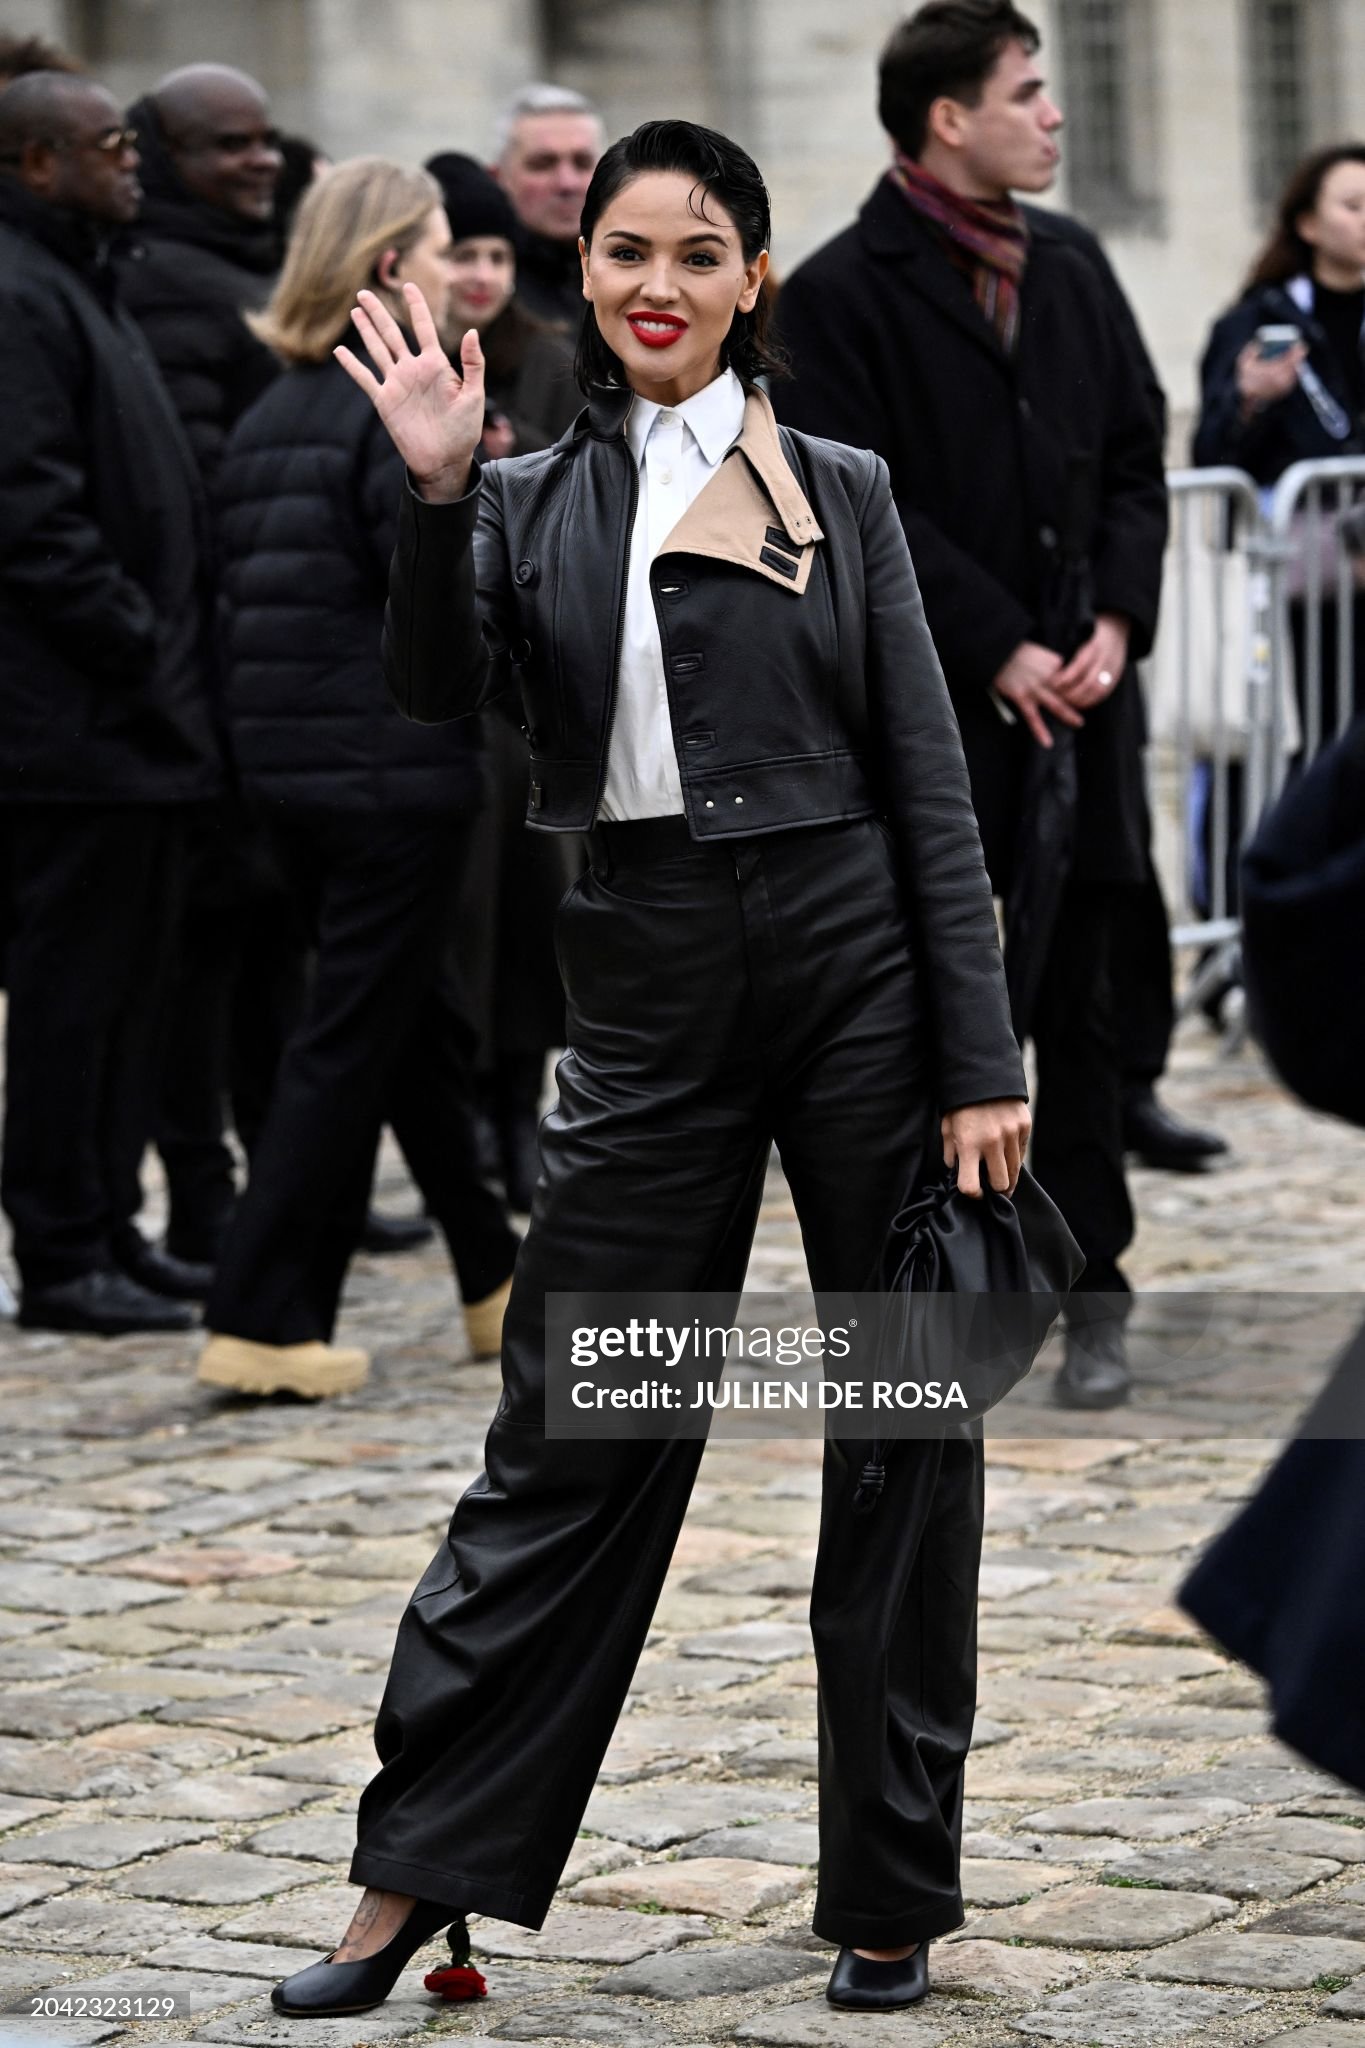 mexican-actress-and-singer-eiza-gonzalez-arrives-for-the-presentation-of-creations-by-loewe.jpg